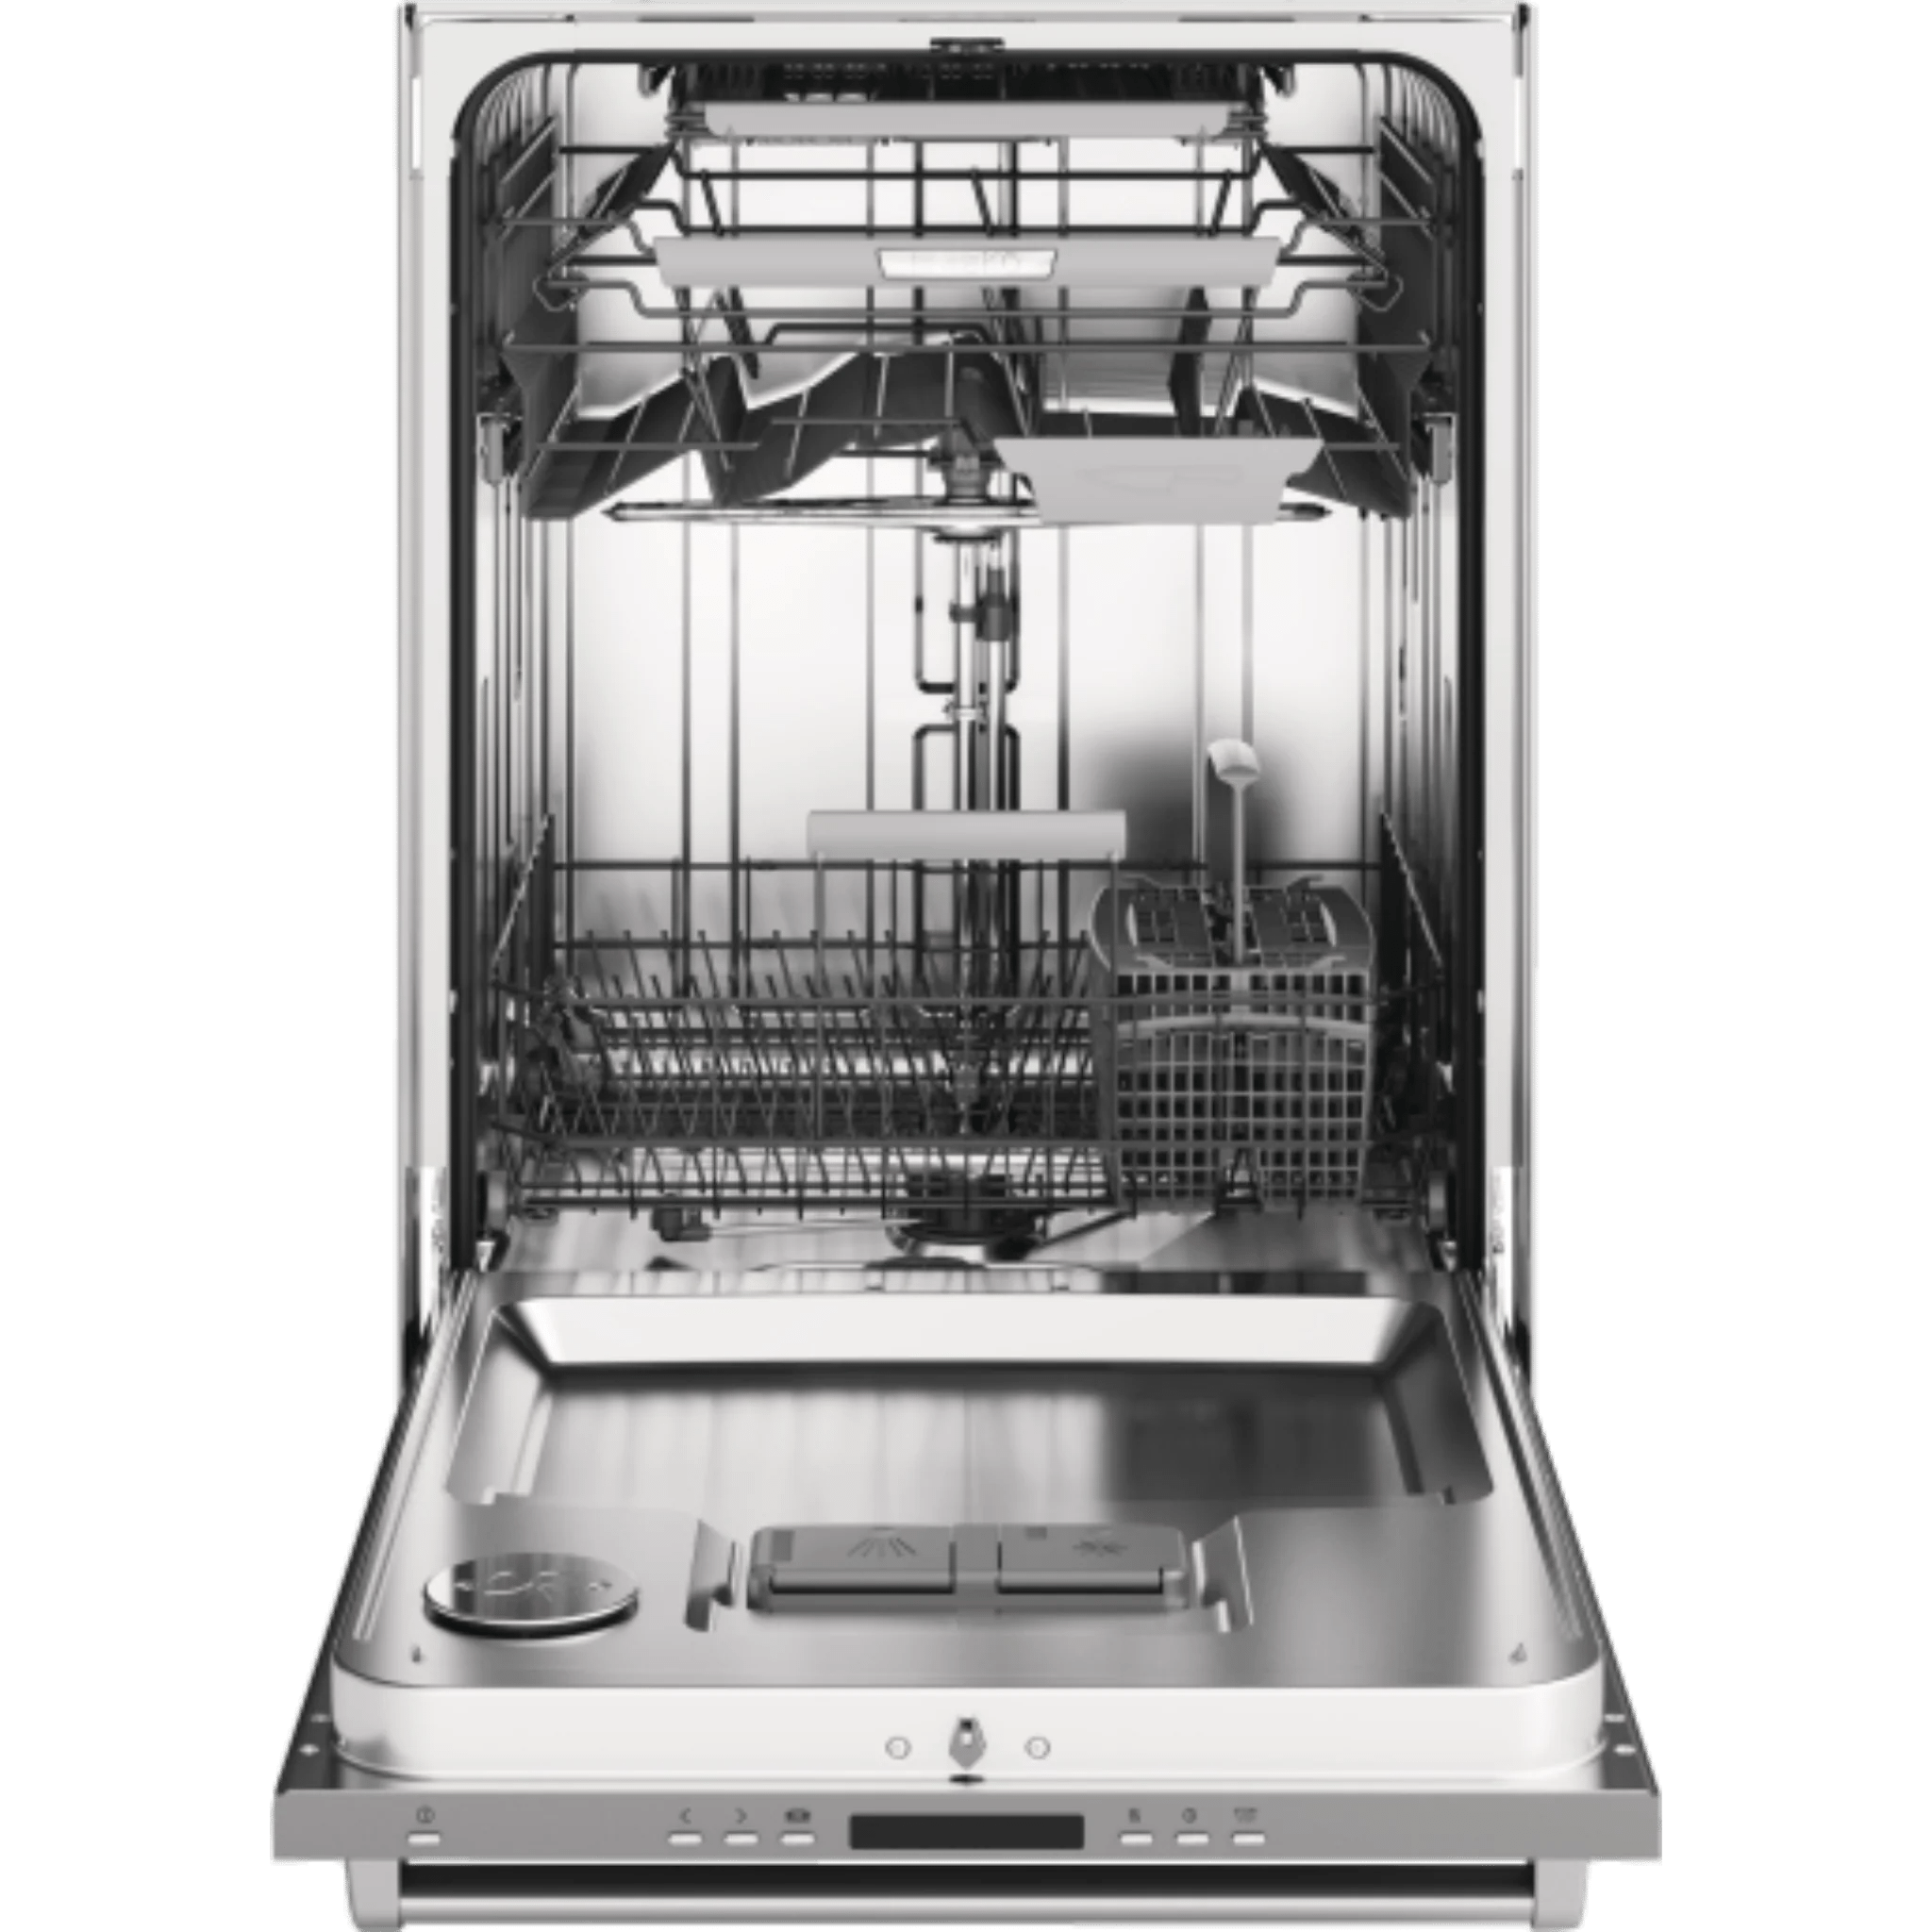 Asko 40 Series 24 Inch Wide 16 Place Setting Energy Star Rated Built-In Top Control Dishwasher with Turbo Drying and Pro Handle Dishwashers DBI664PHXXLS Luxury Appliances Direct